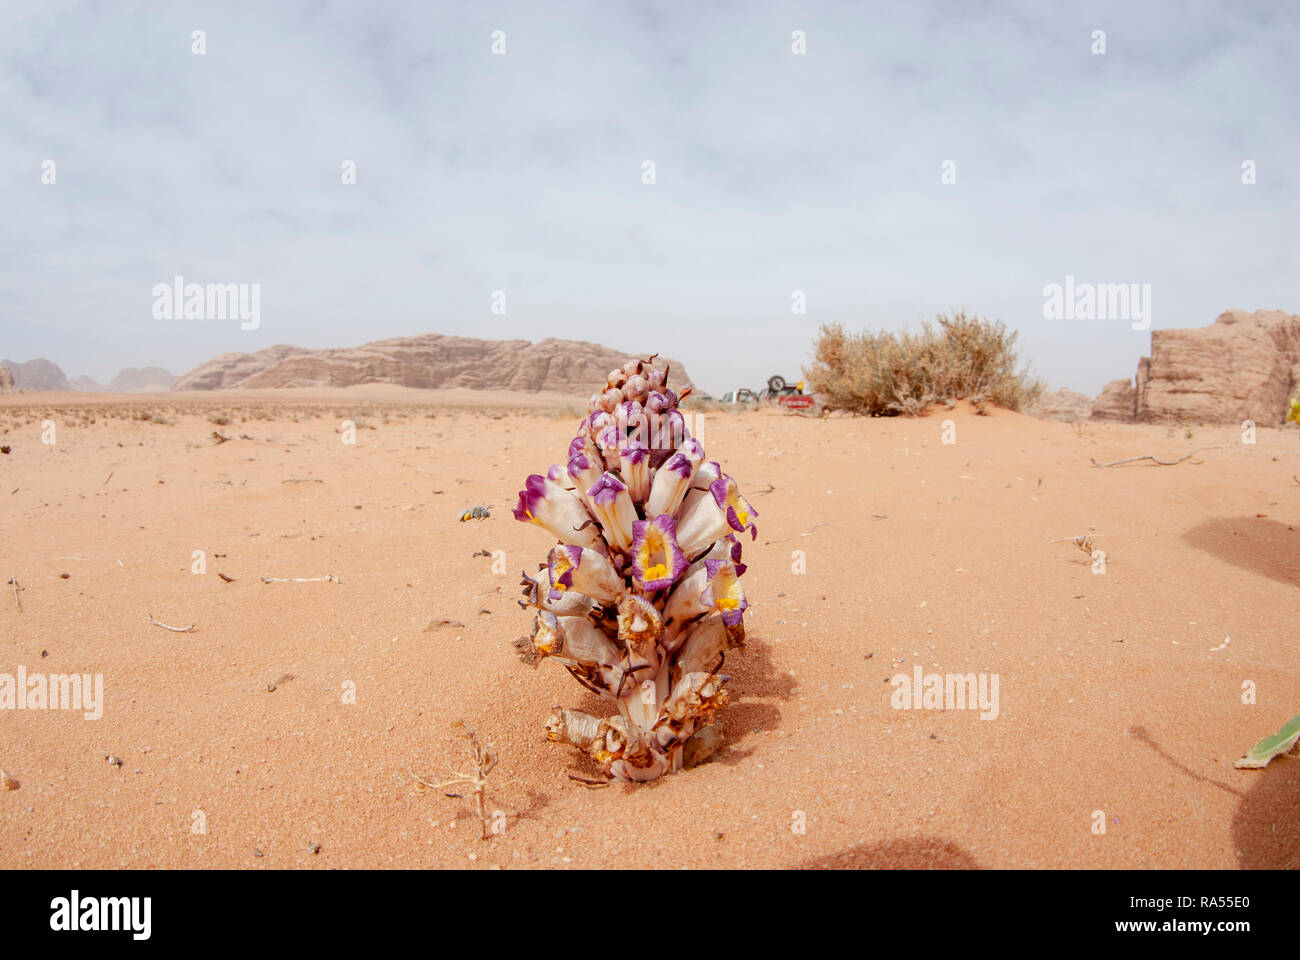 Violet Cistanche (Cistanche salsa) Also Violet Broomrape flowering in the desert. This plant is a parasitic member of the broomrape family. Photograph Stock Photo